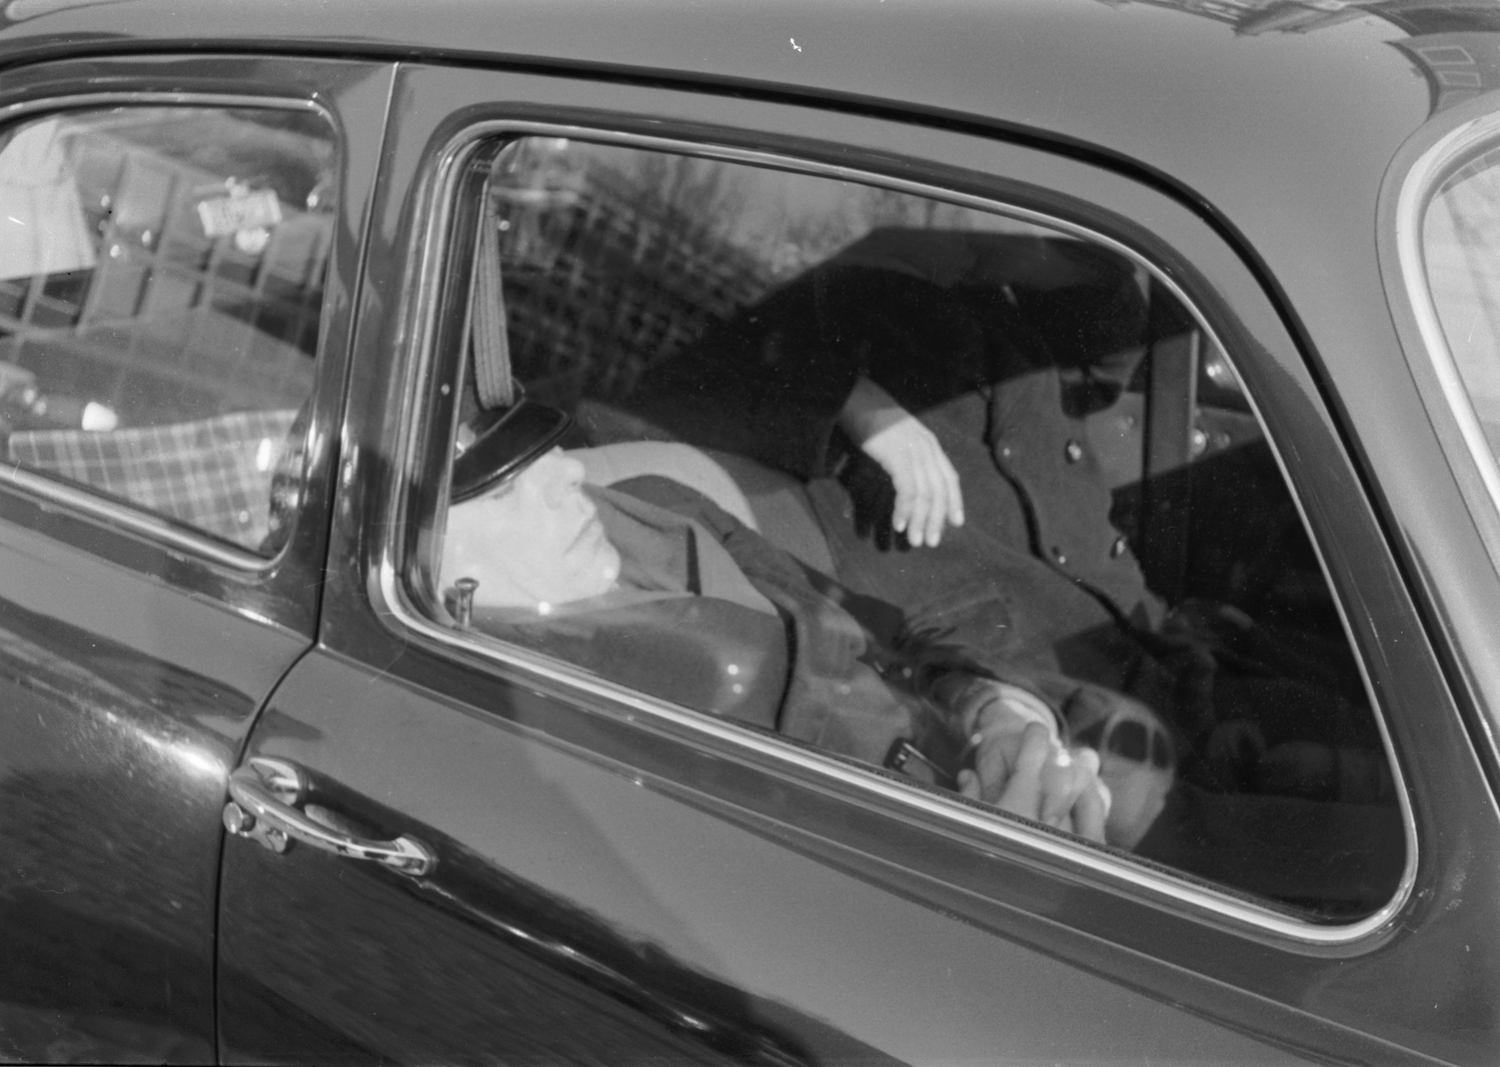 This is a photo of a man sleeping in a Volkswagen Beetle. Sleeping in your car is legal unless prohibited by local laws. | Erich Andres/United Images via Getty Images